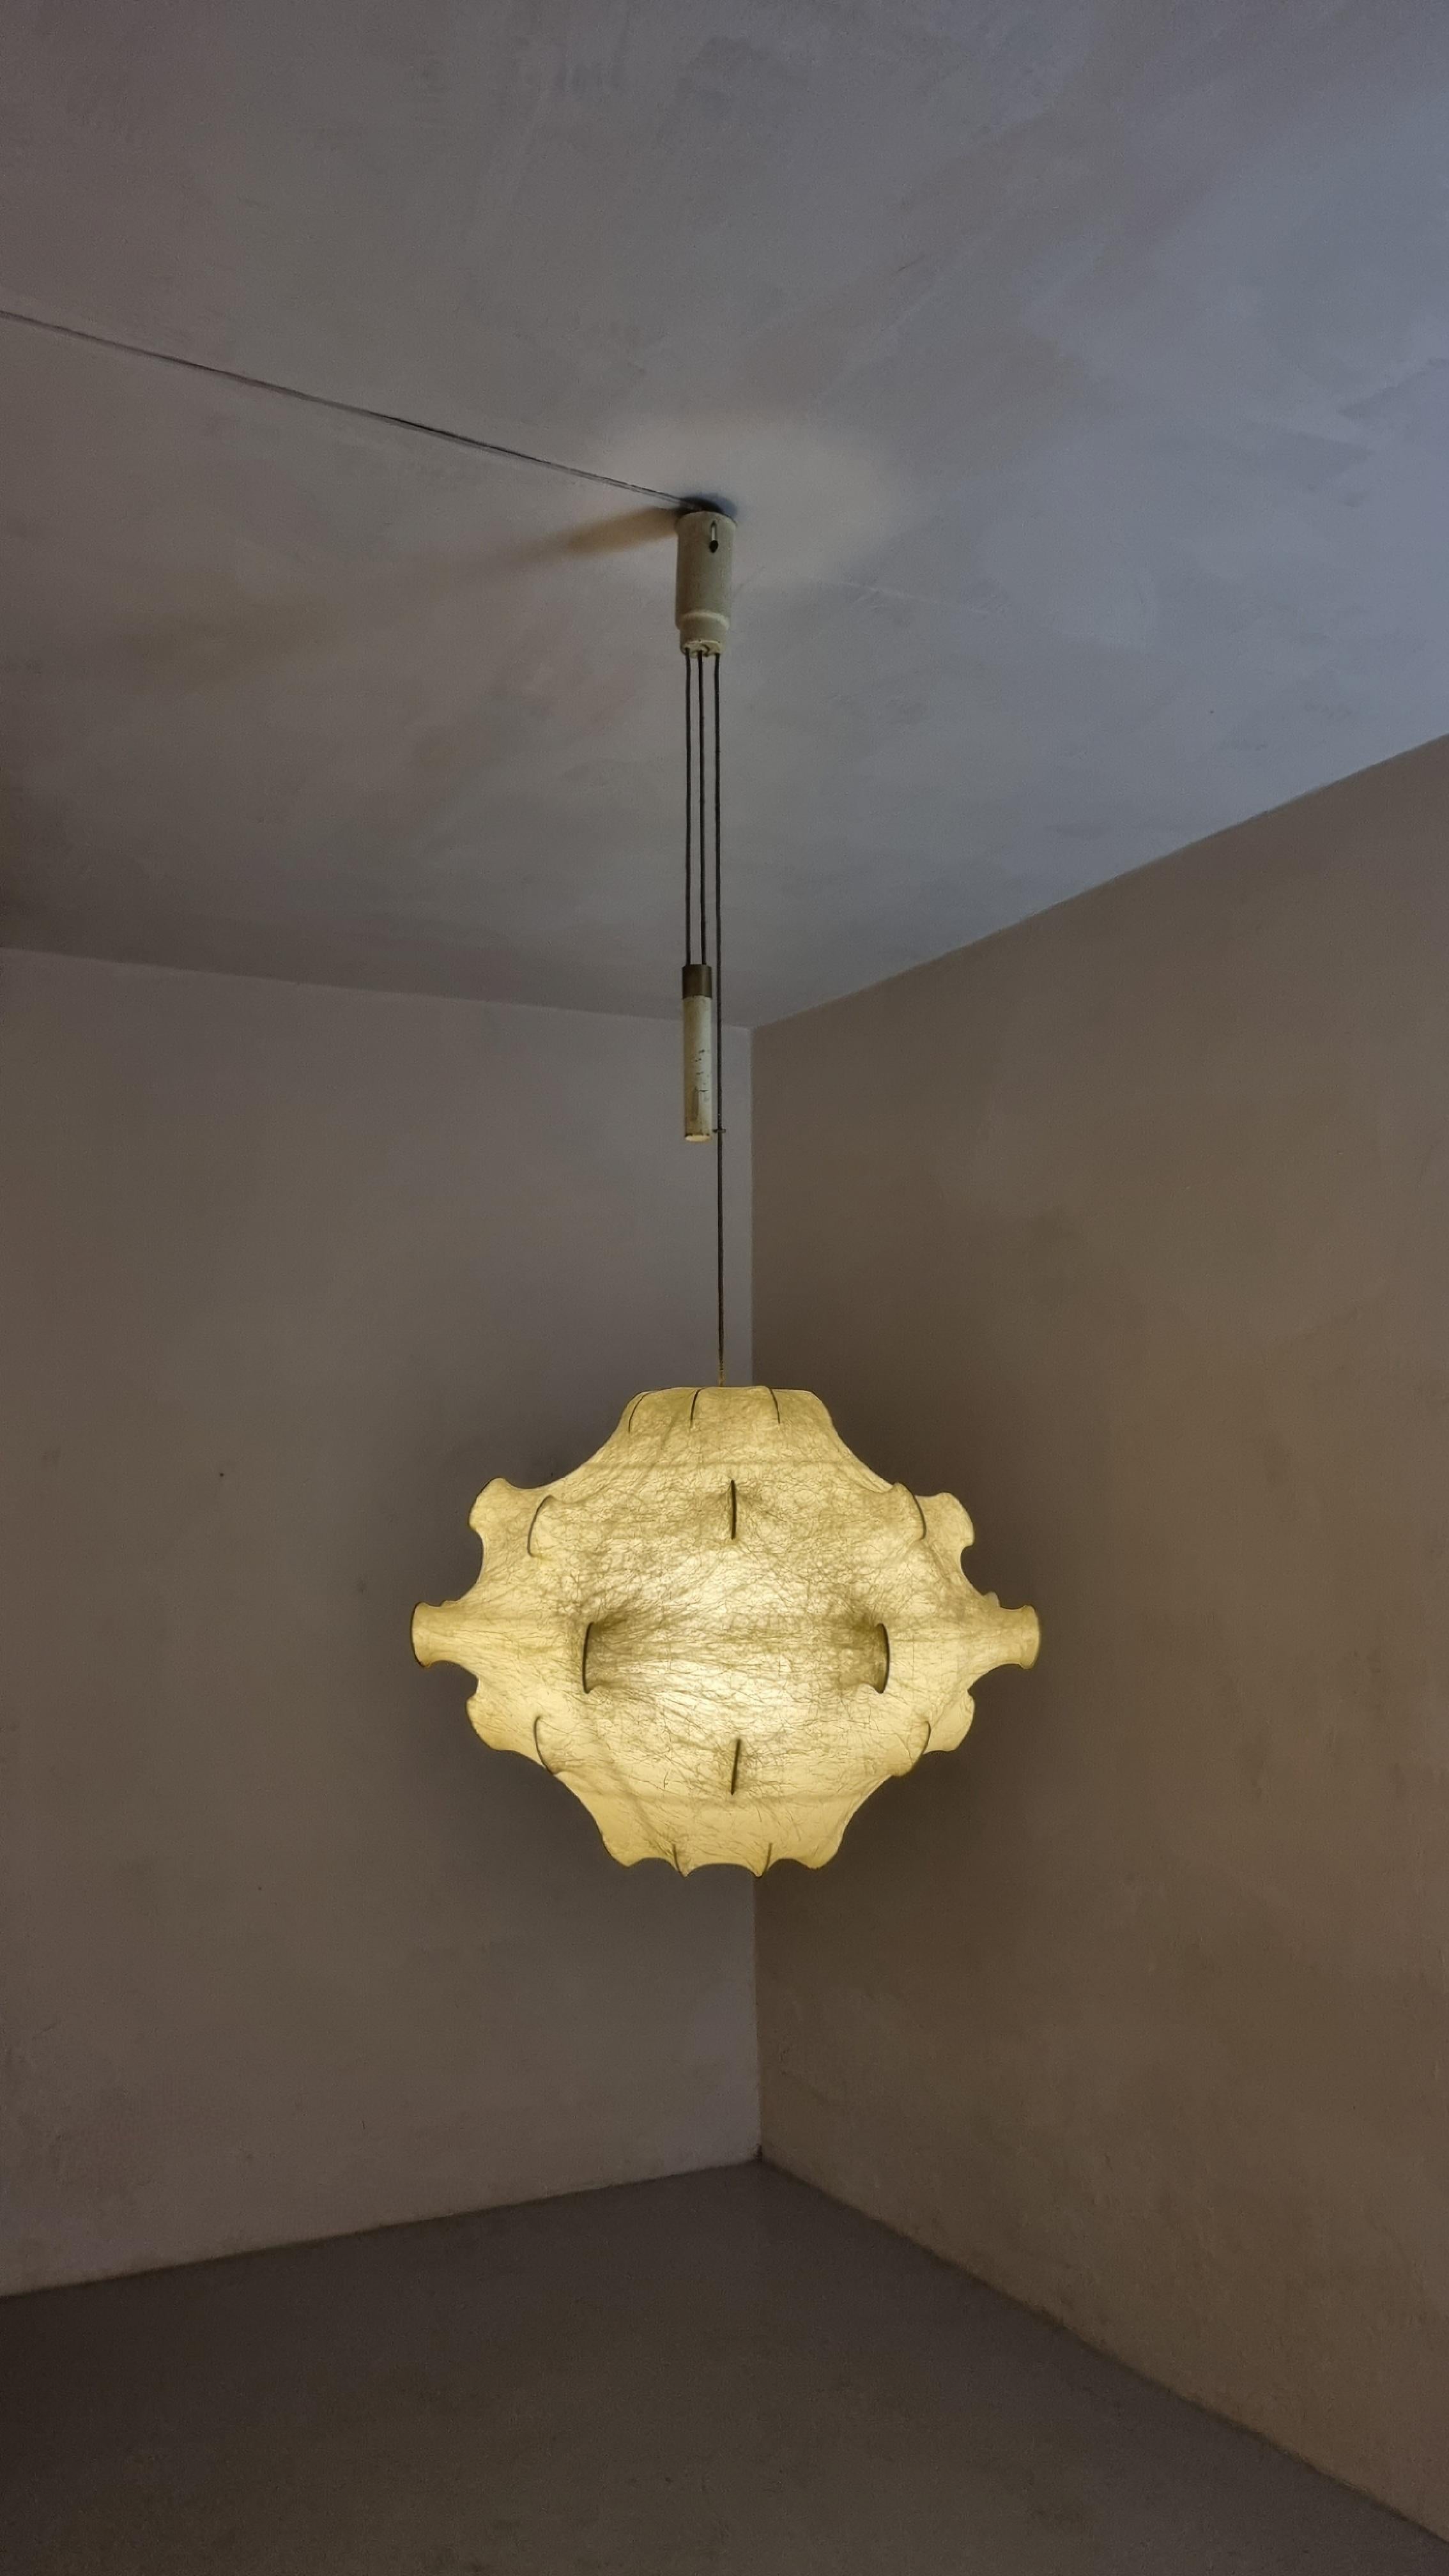 Large ceiling lamp Taraxacum 2 designed by Achille and Pier Giacomo Castiglioni for Flos, 1960.
Internal structure in white painted steel, sprayed with special resin cocoon, first production in good condition, measures 90 cm (35.4 inc) and 64 cm (25